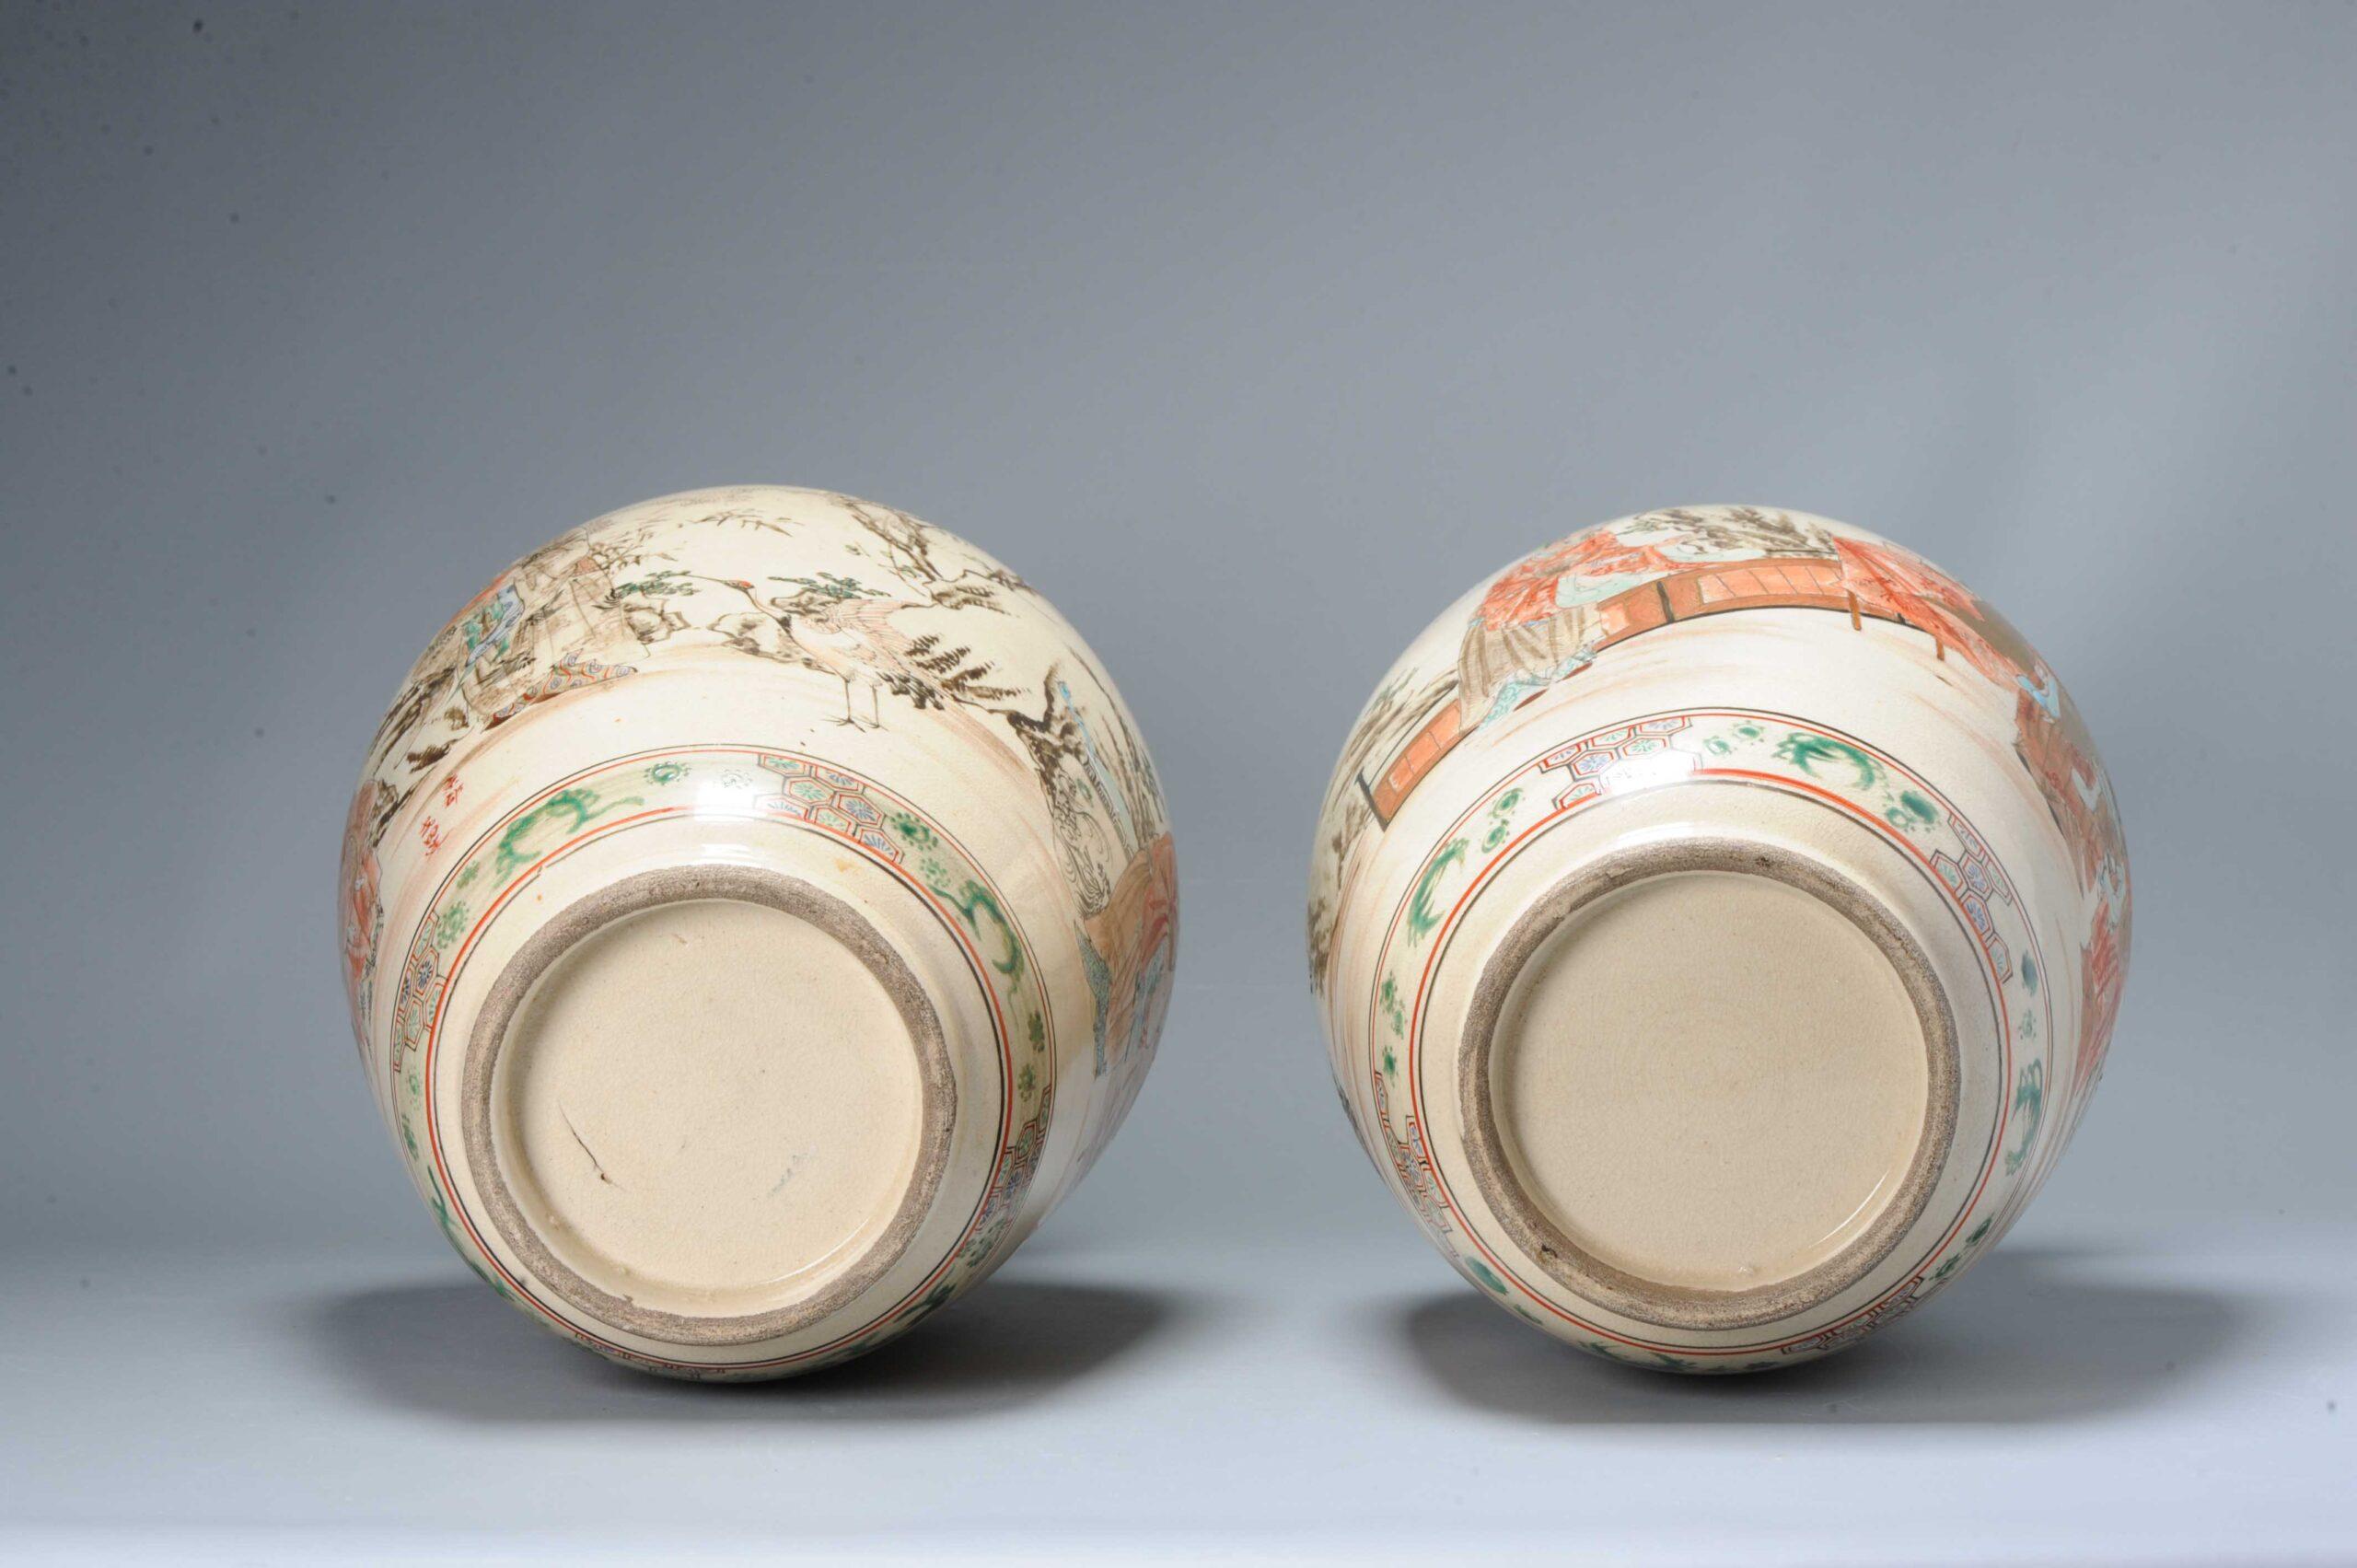 The stunning pair of Satsuma vases from the Meiji period, true masterpieces of Japanese art. These magnificent vases are a testament to the rich history and cultural heritage of Japan and are sure to capture the imagination of any